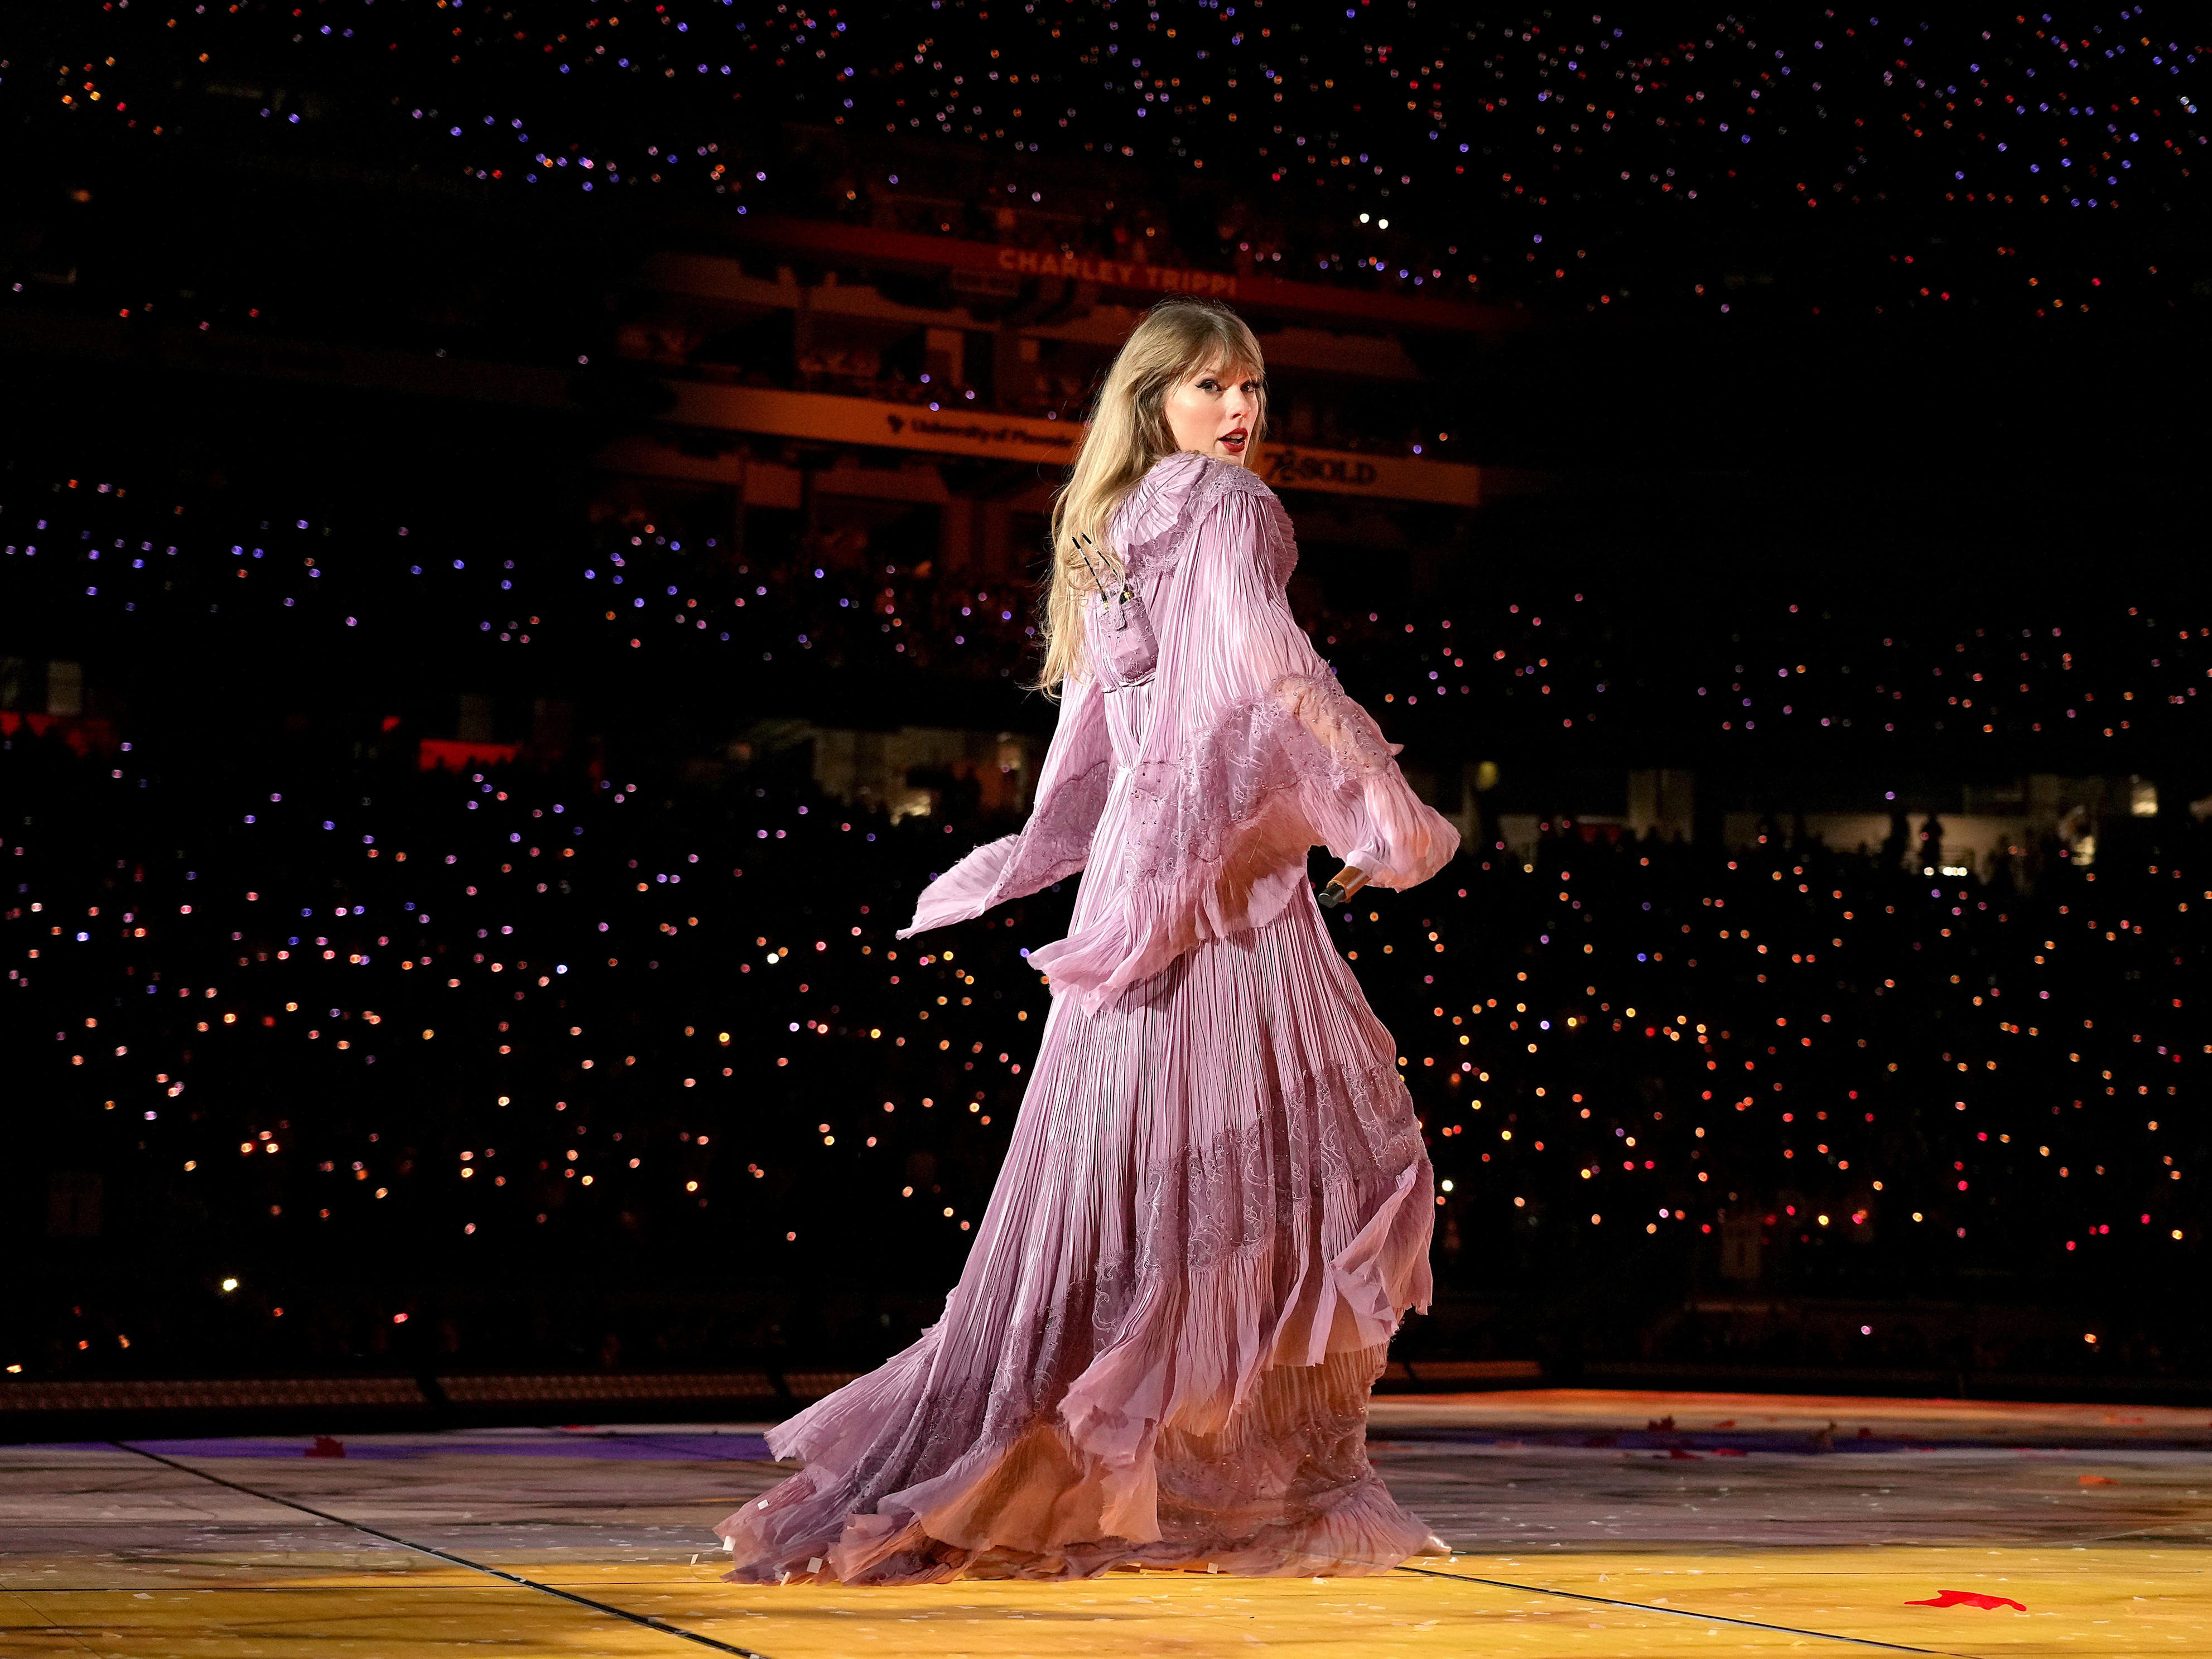 <p>Swift's <a href="https://www.businessinsider.com/taylor-swift-grammys-performance-video-cardigan-august-willow-2021-3">debut performance of "August"</a> took place at the 2021 Grammy Awards. Later that night, <a href="https://www.businessinsider.com/taylor-swift-grammys-history-aoty-three-times-2021-3">she won album of the year for "Folklore,"</a> her record-tying third trophy in that category.</p>